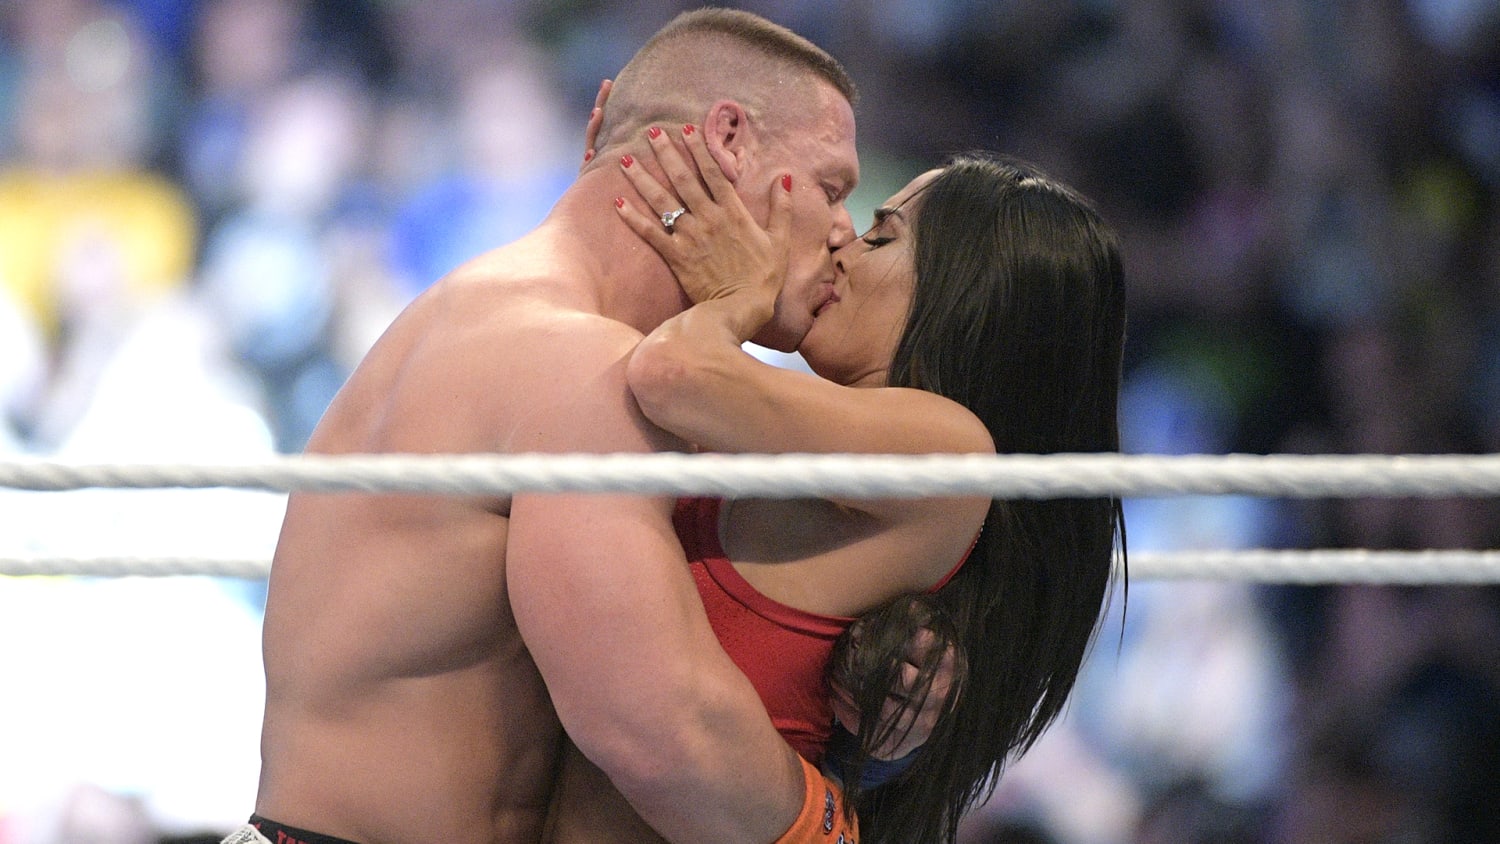 John Cena pops the question to Nikki Bella at WrestleMania 33 — and she said yes!